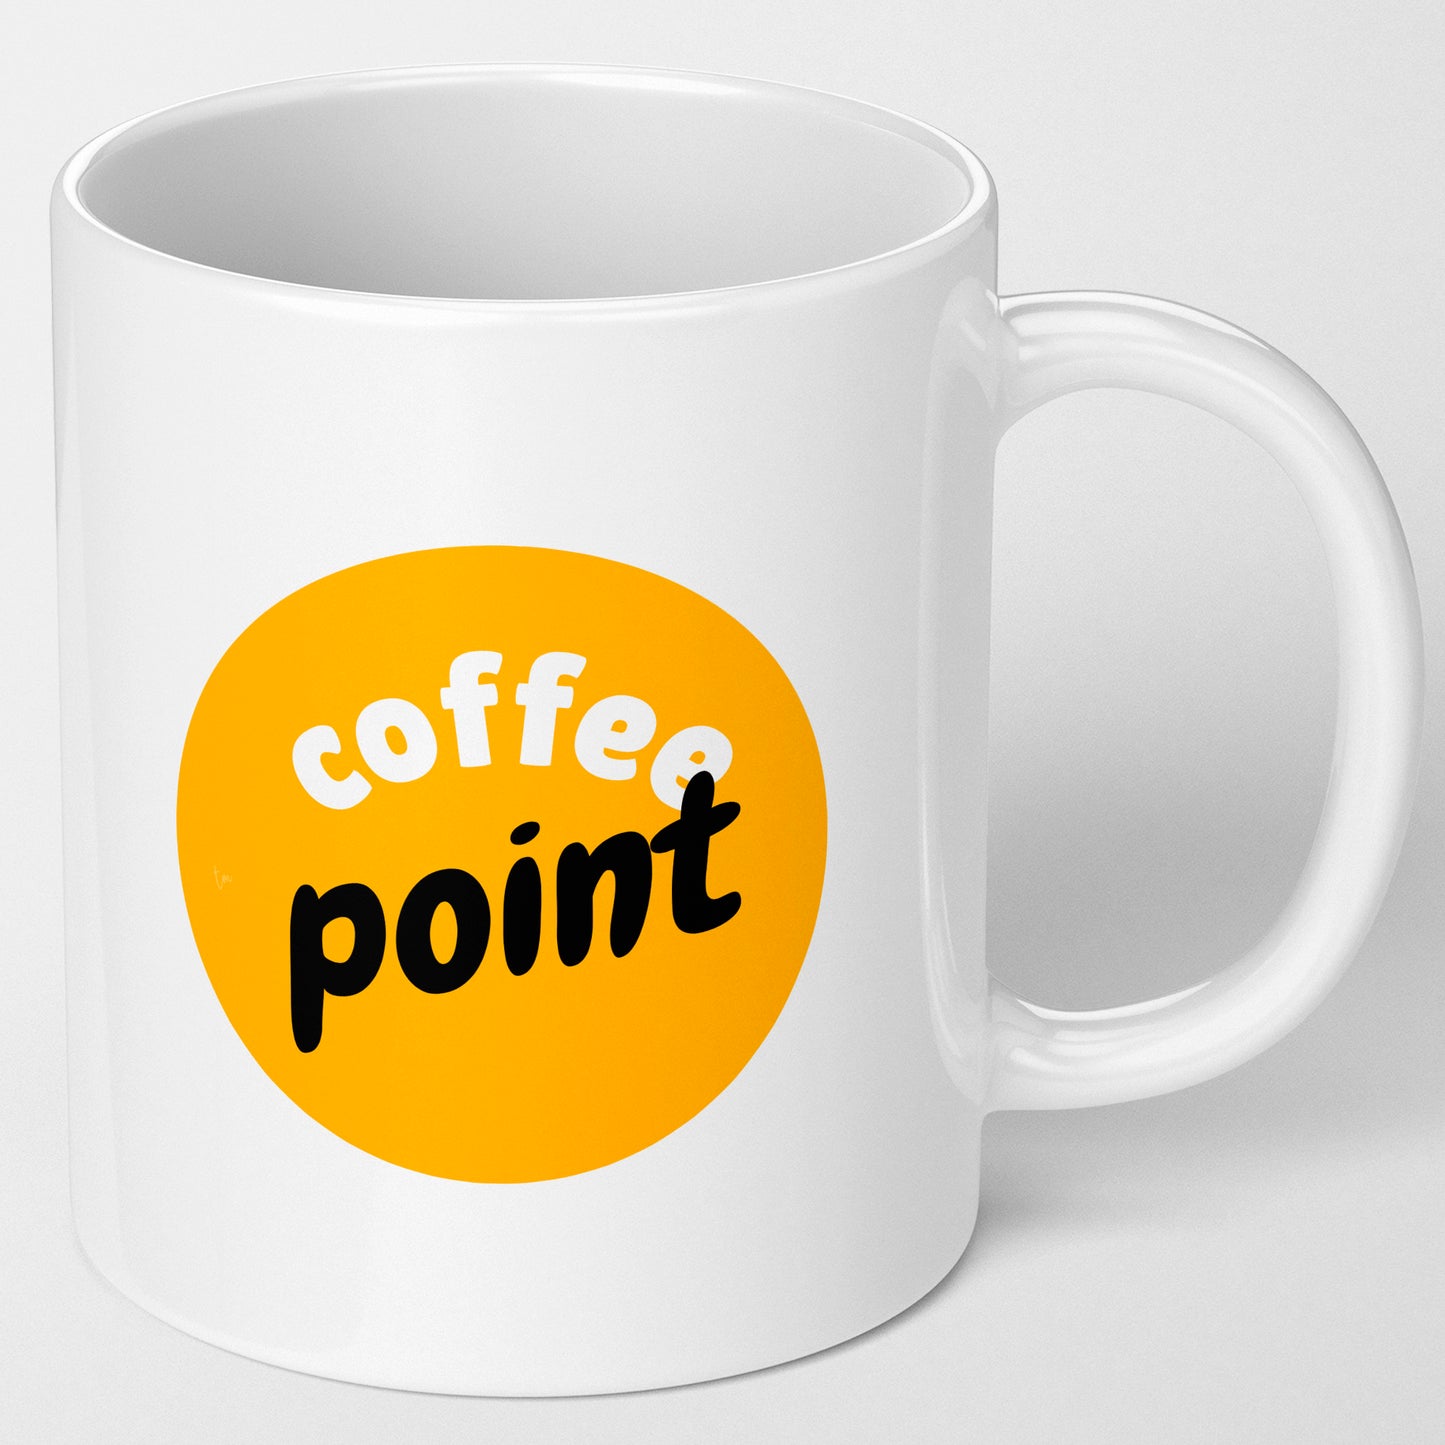 £1.66 Bulk Branded Mugs (WHITE) - Fully Inclusive Pricing Full Colour Both Sides &  Free Delivery